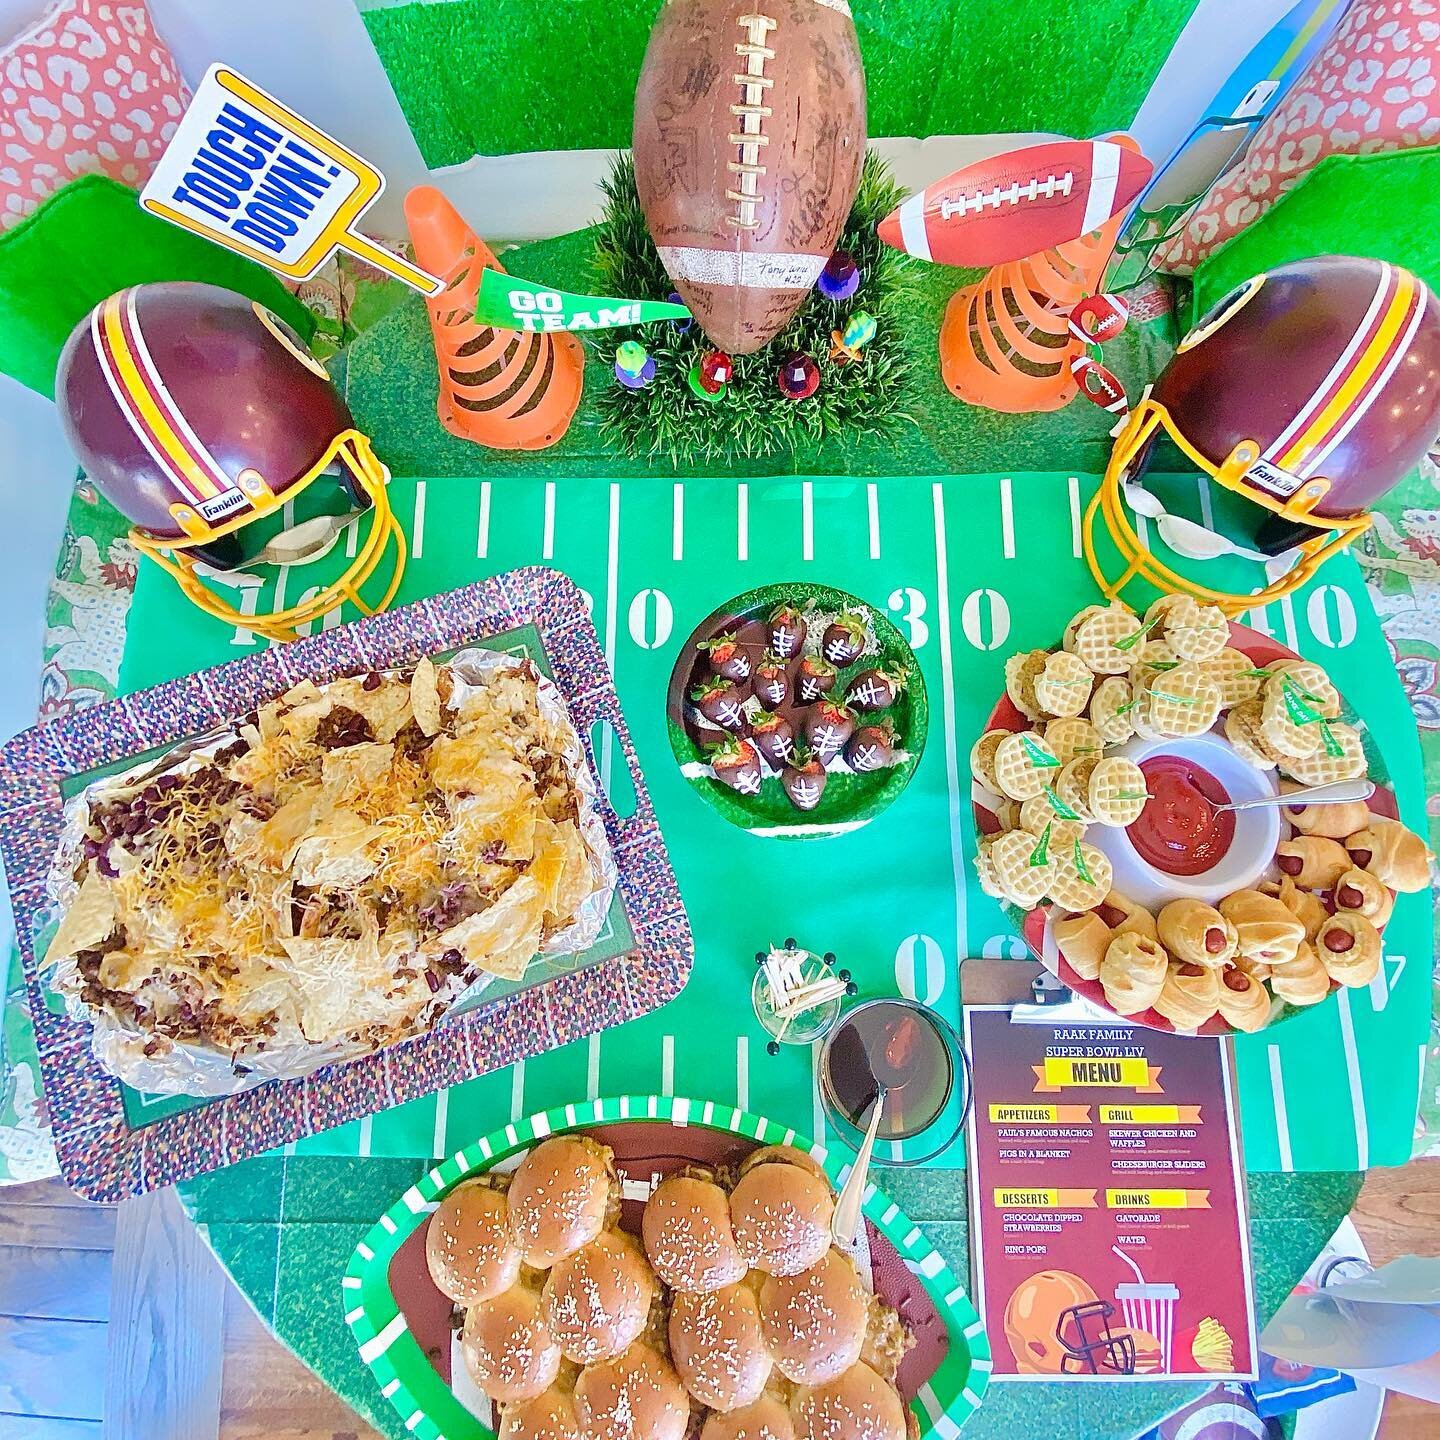 It&rsquo;s Super Bowl Sunday and besides the half time show, food is most talked about part of the Super Bowl, am I right? @collyncapp and I pulled together some easy, kid friendly, kid approved game day recipes for @erikanbc4 and @erikanbc4. I know 